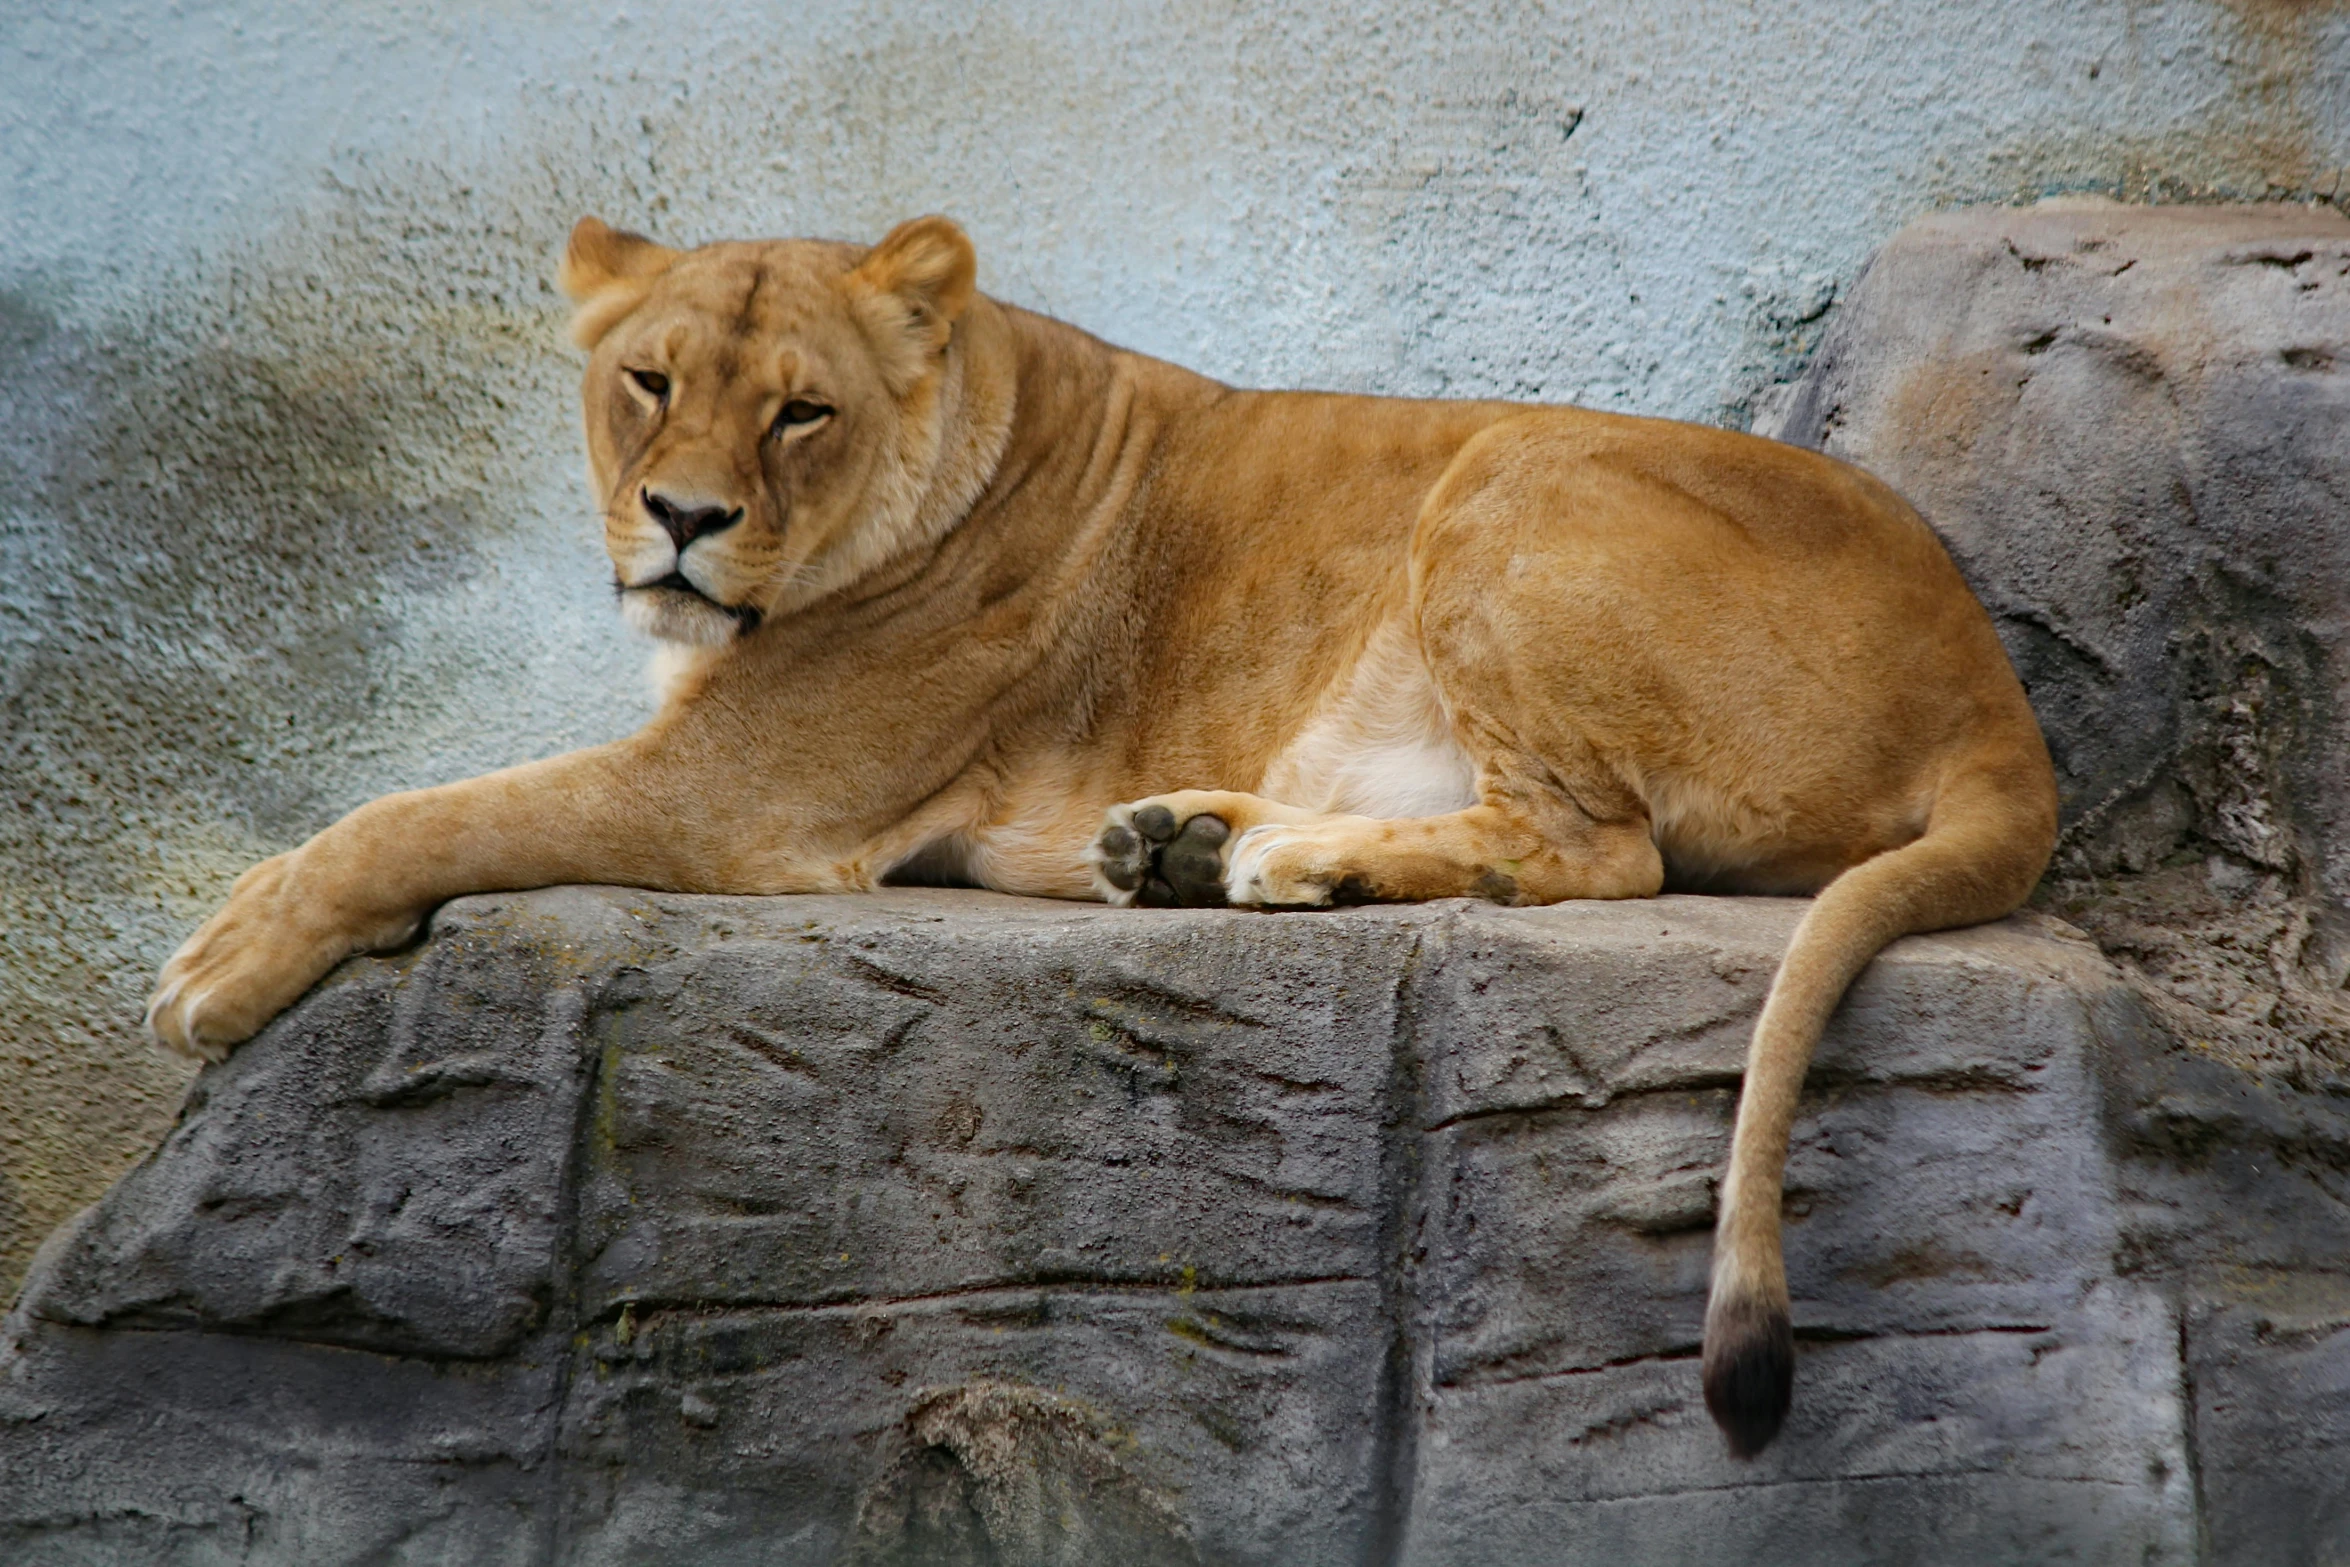 the large lion has just fallen asleep on a rock